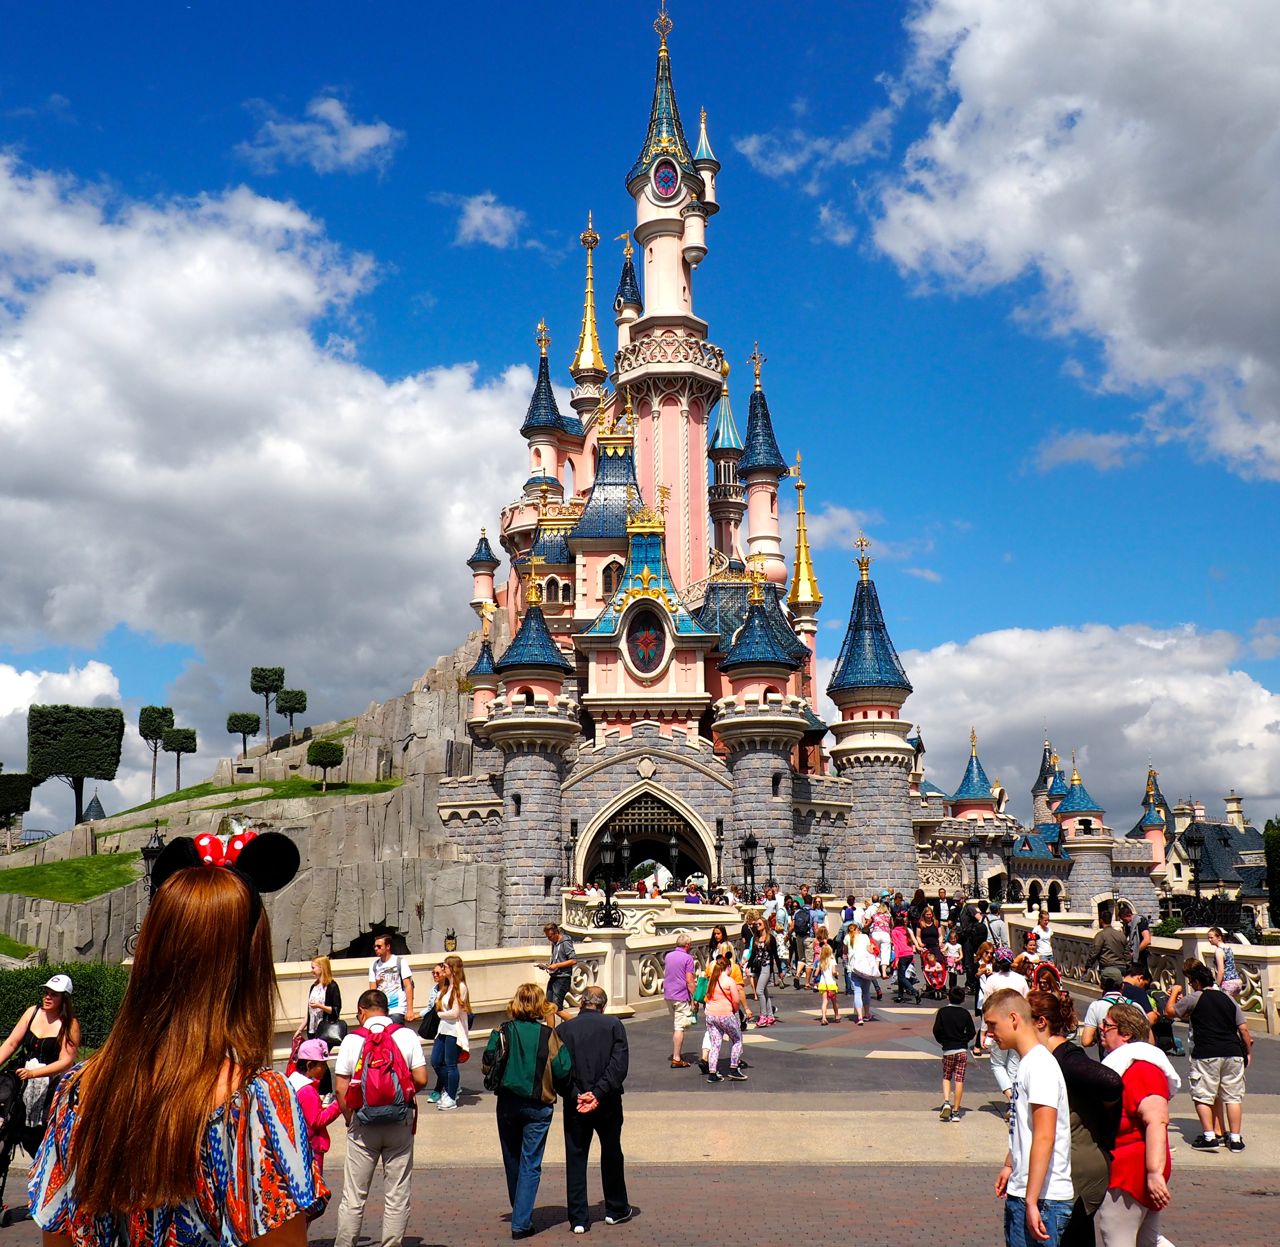 Les Meilleurs Attractions De Disneyland Paris Your visit to Disneyland should be magical and a day to remember. Here